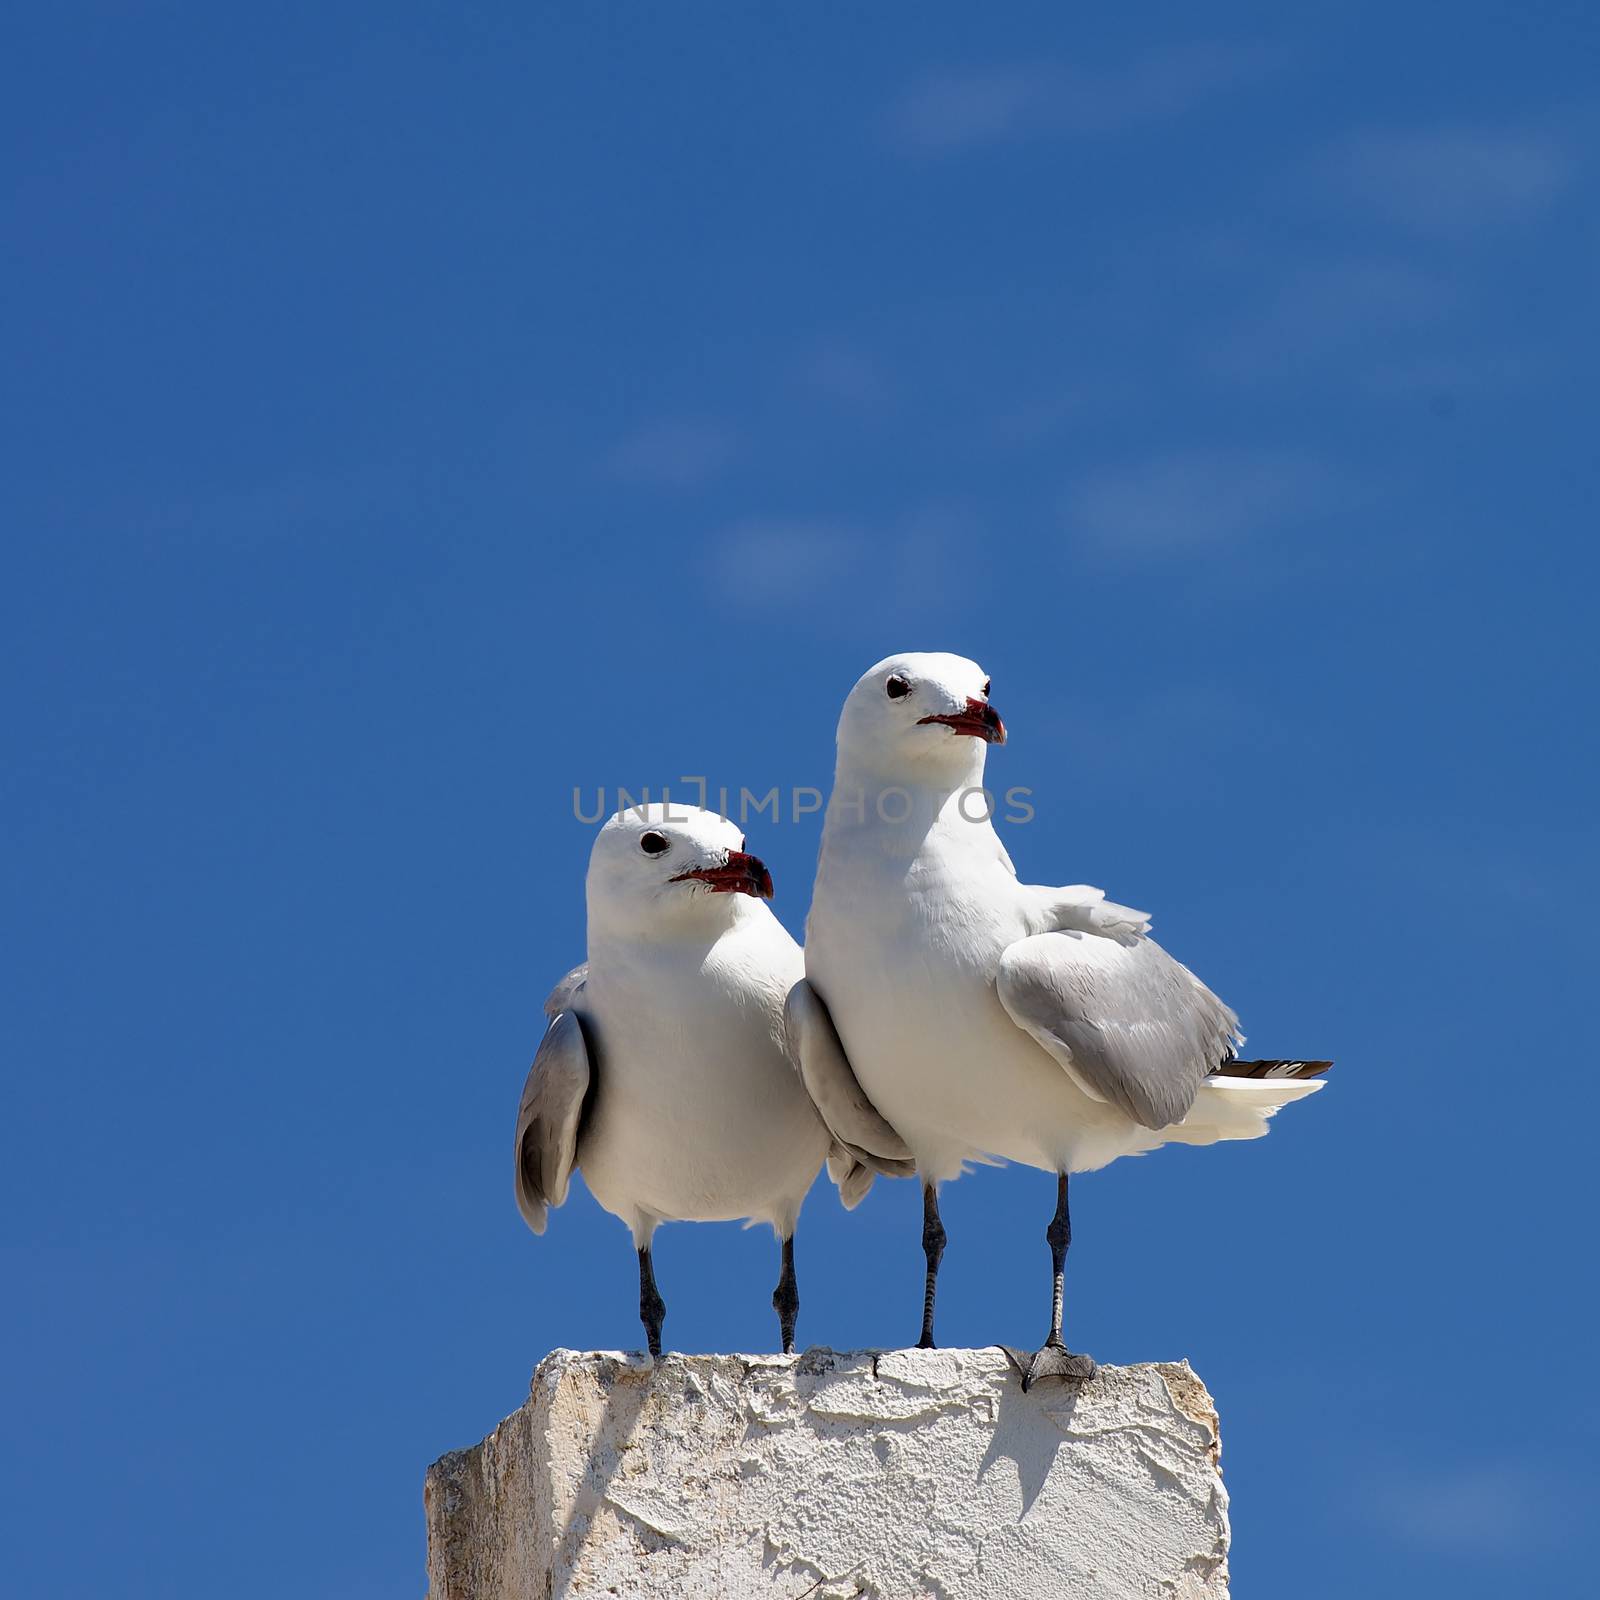 Two Beauty Seagulls near Each Other Sitting on Edge of Berth isolated on Blue Sky background Outdoors